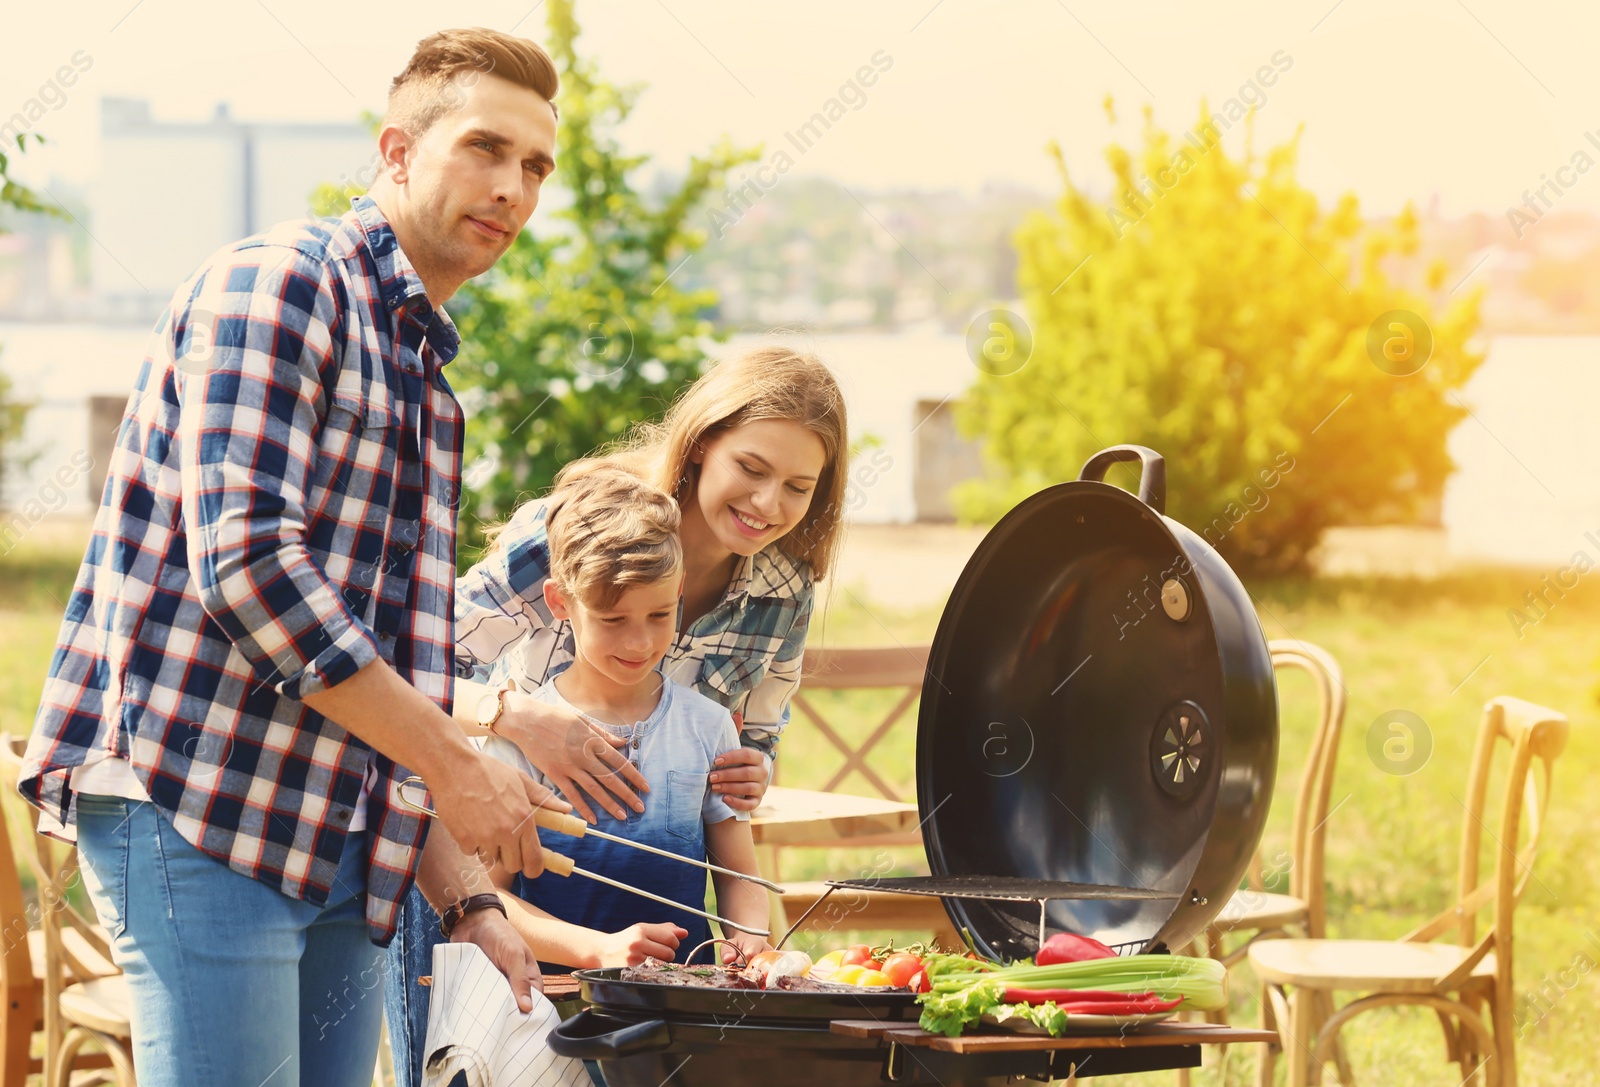 Image of Happy family having barbecue with modern grill outdoors on sunny day